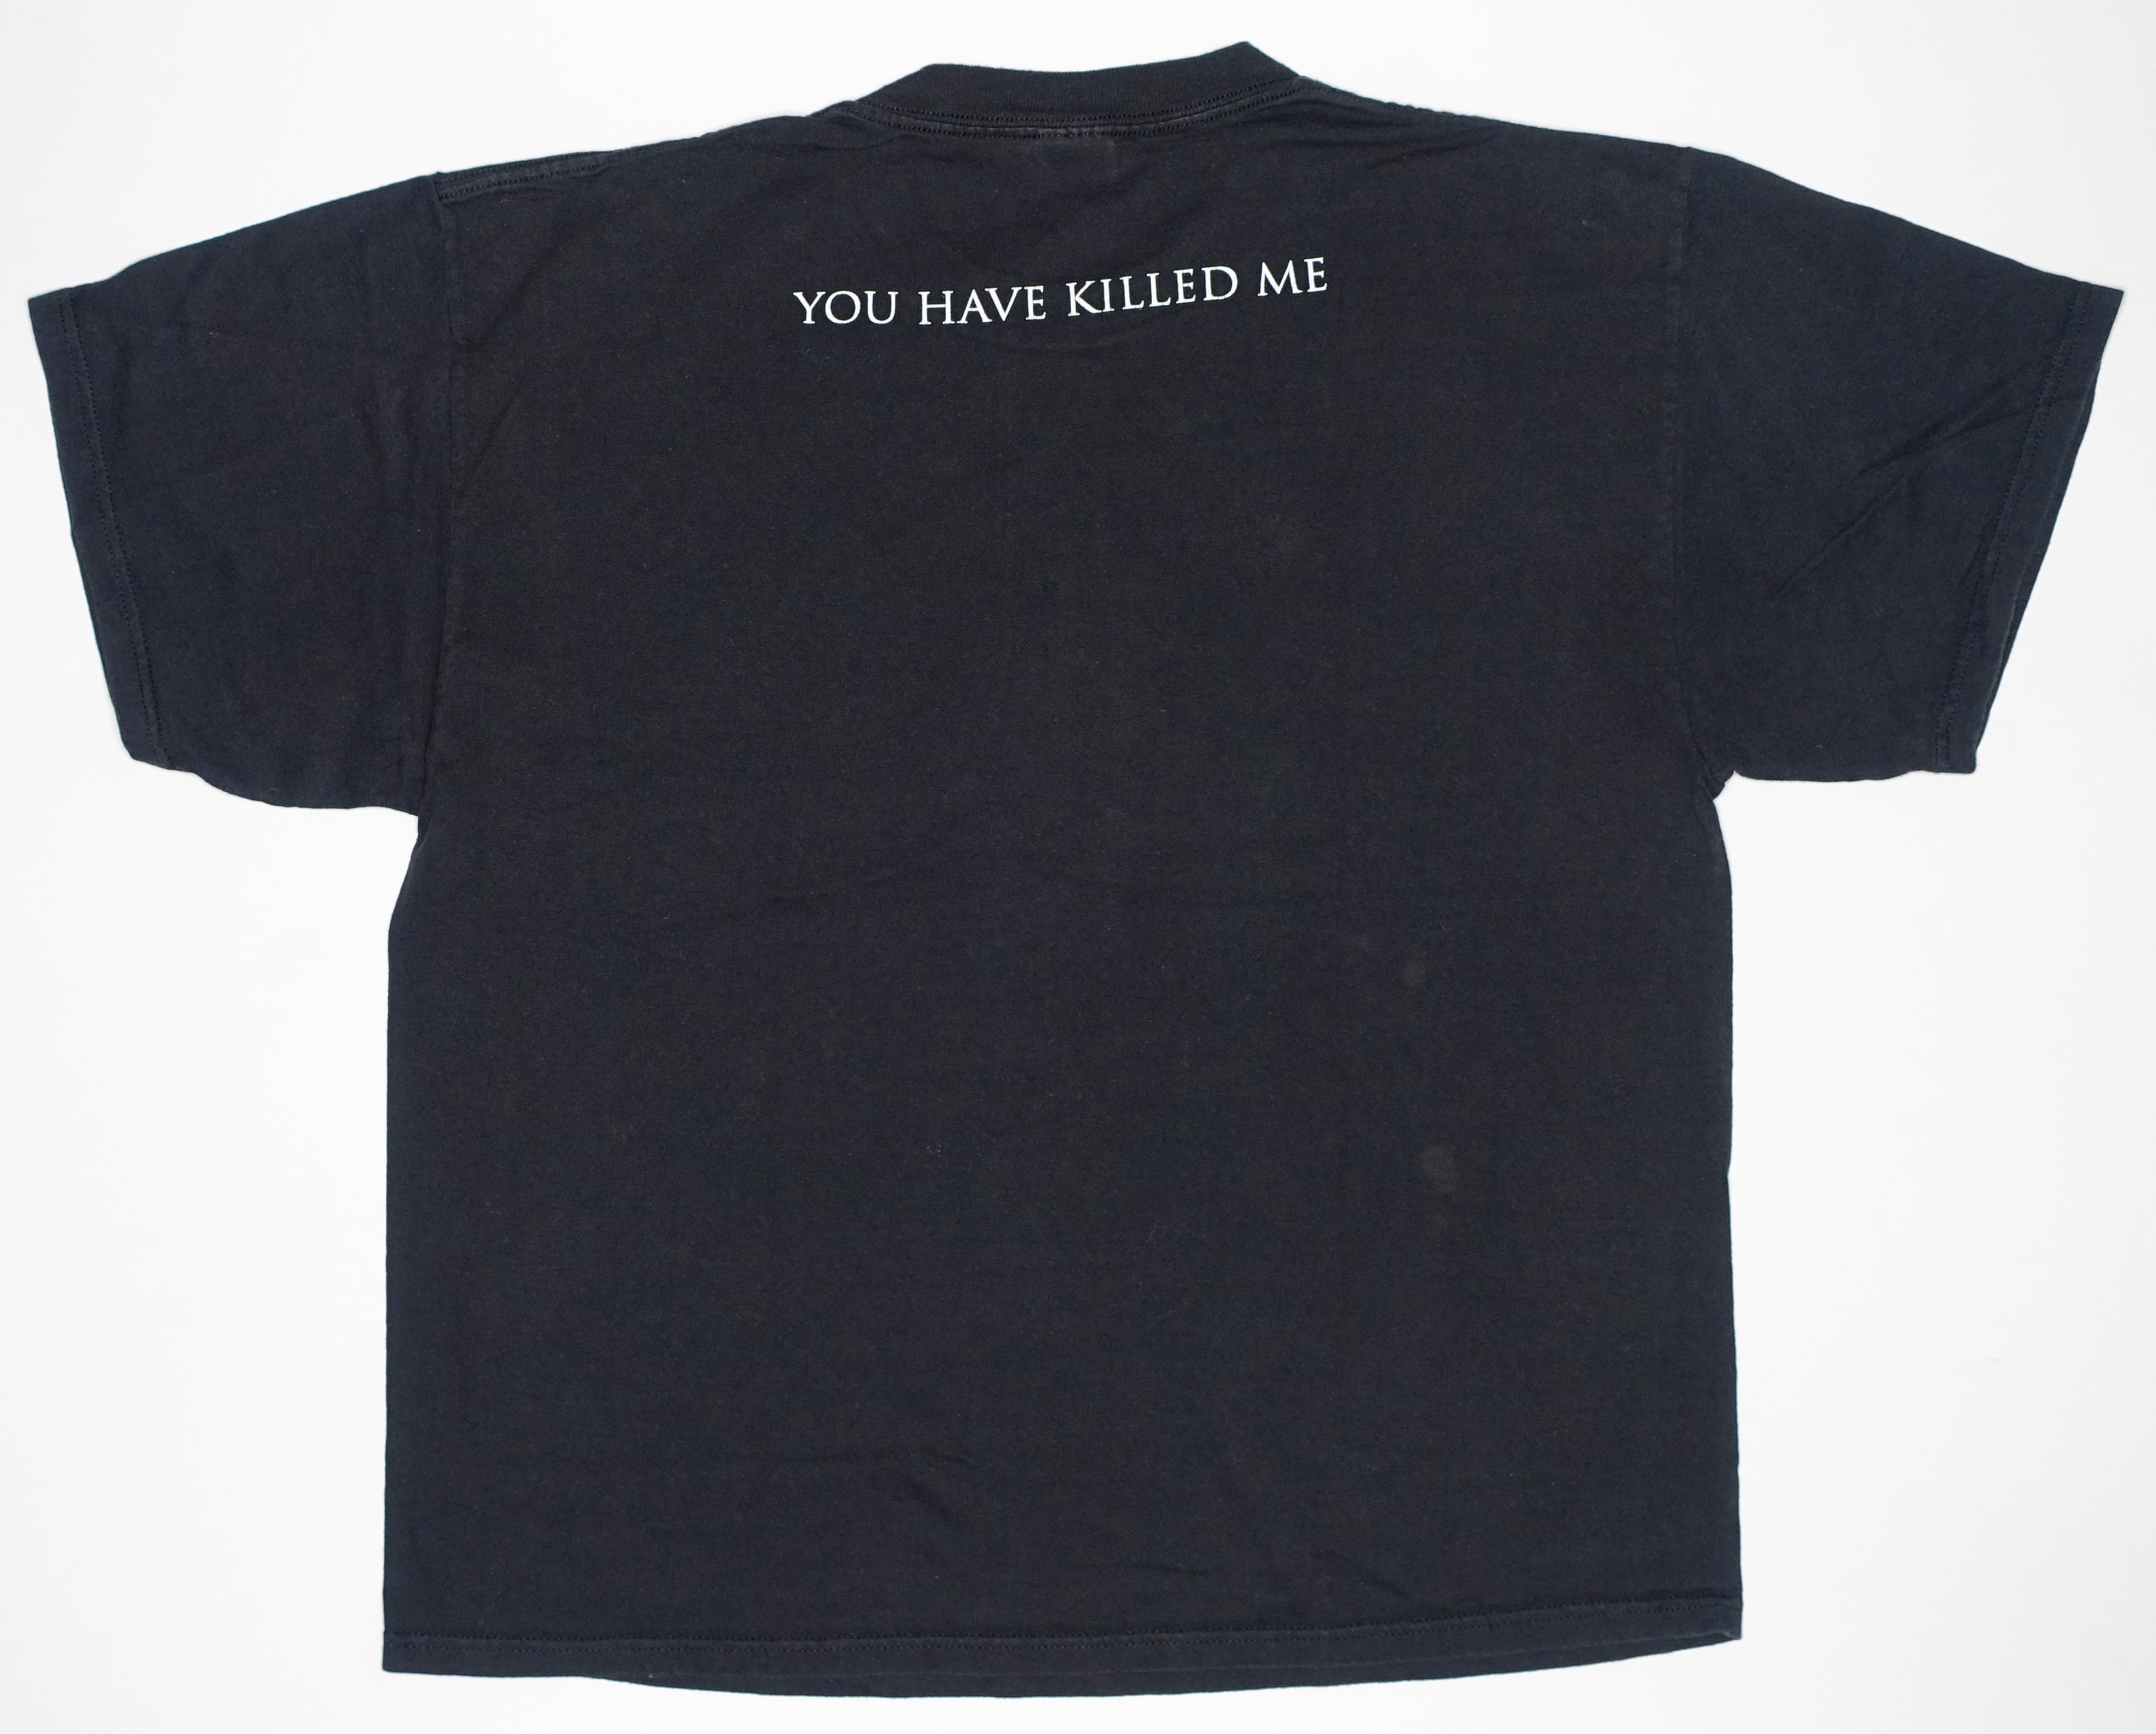 Morrissey - You Have Killed Me Promo Only Shirt Size Large